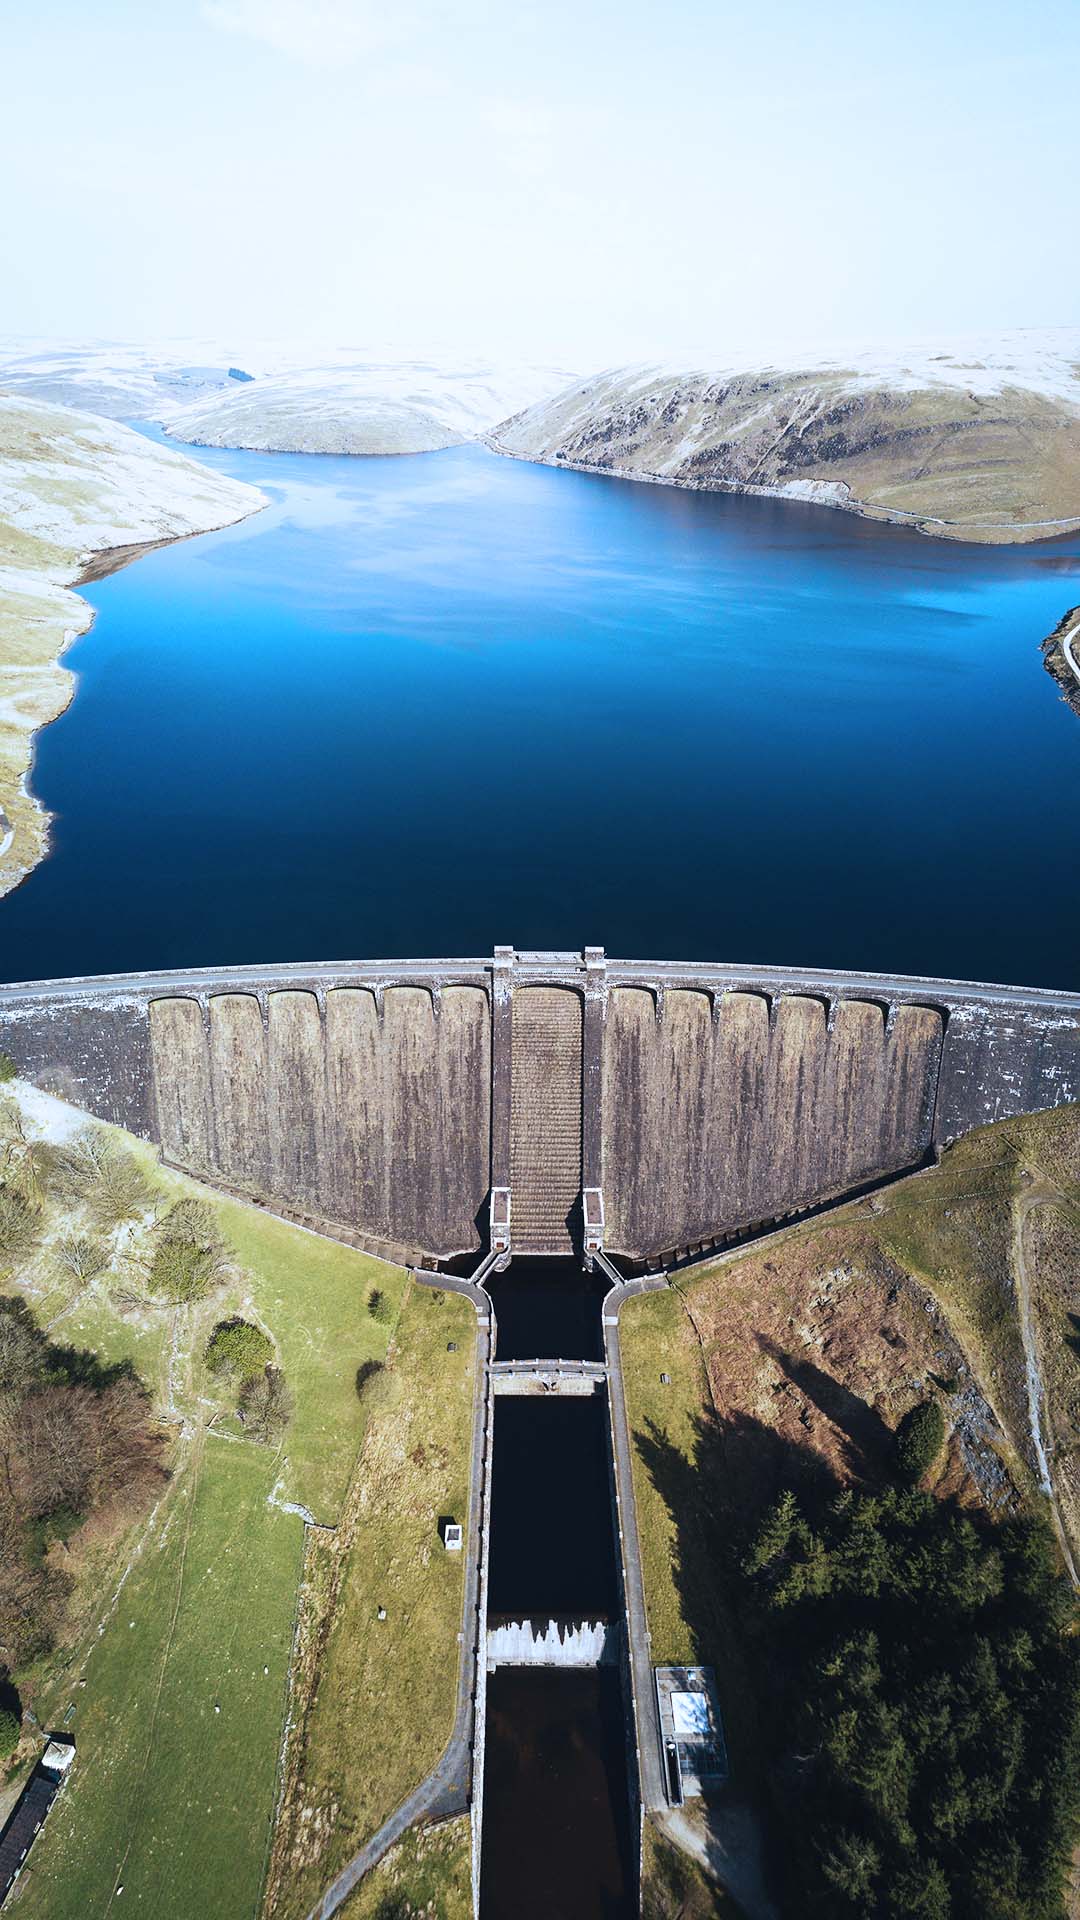 A dam with massive capacity of water